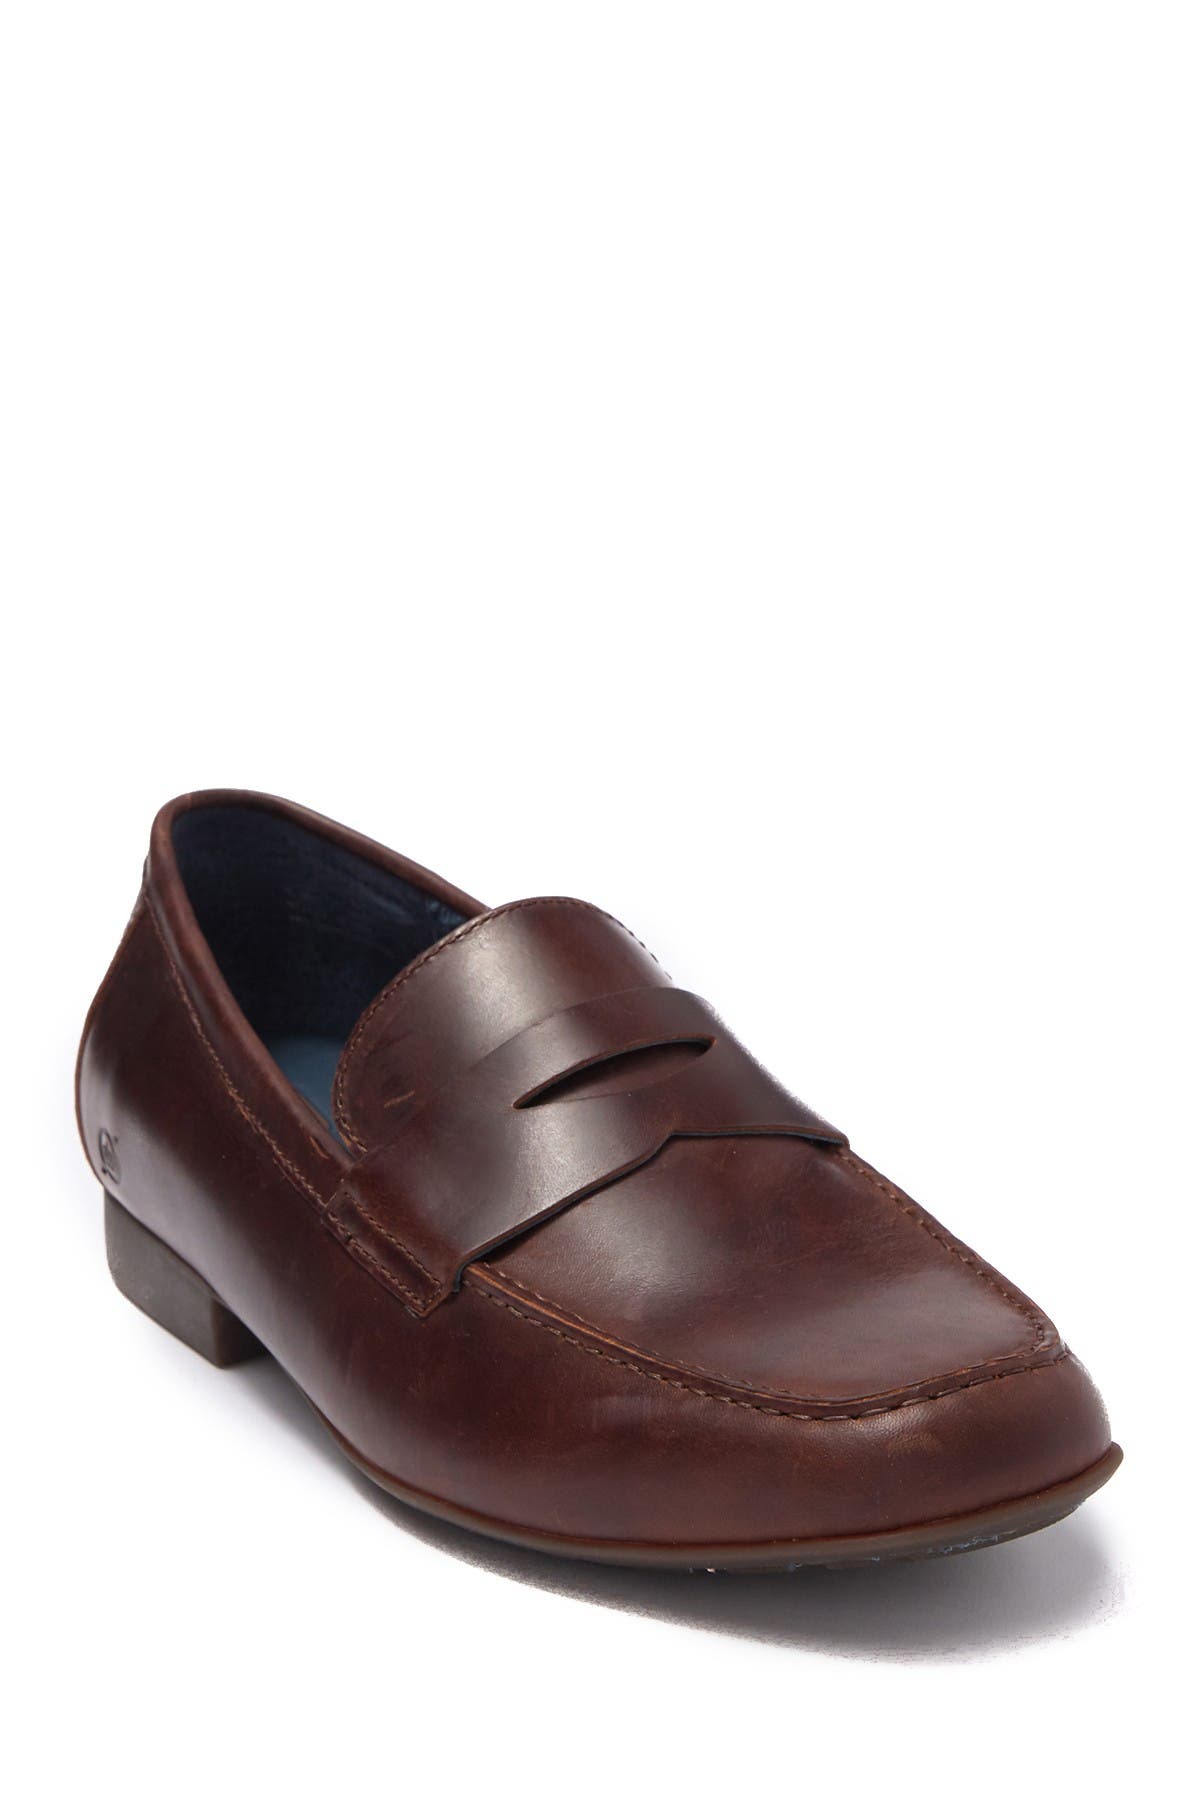 nordstrom penny loafers